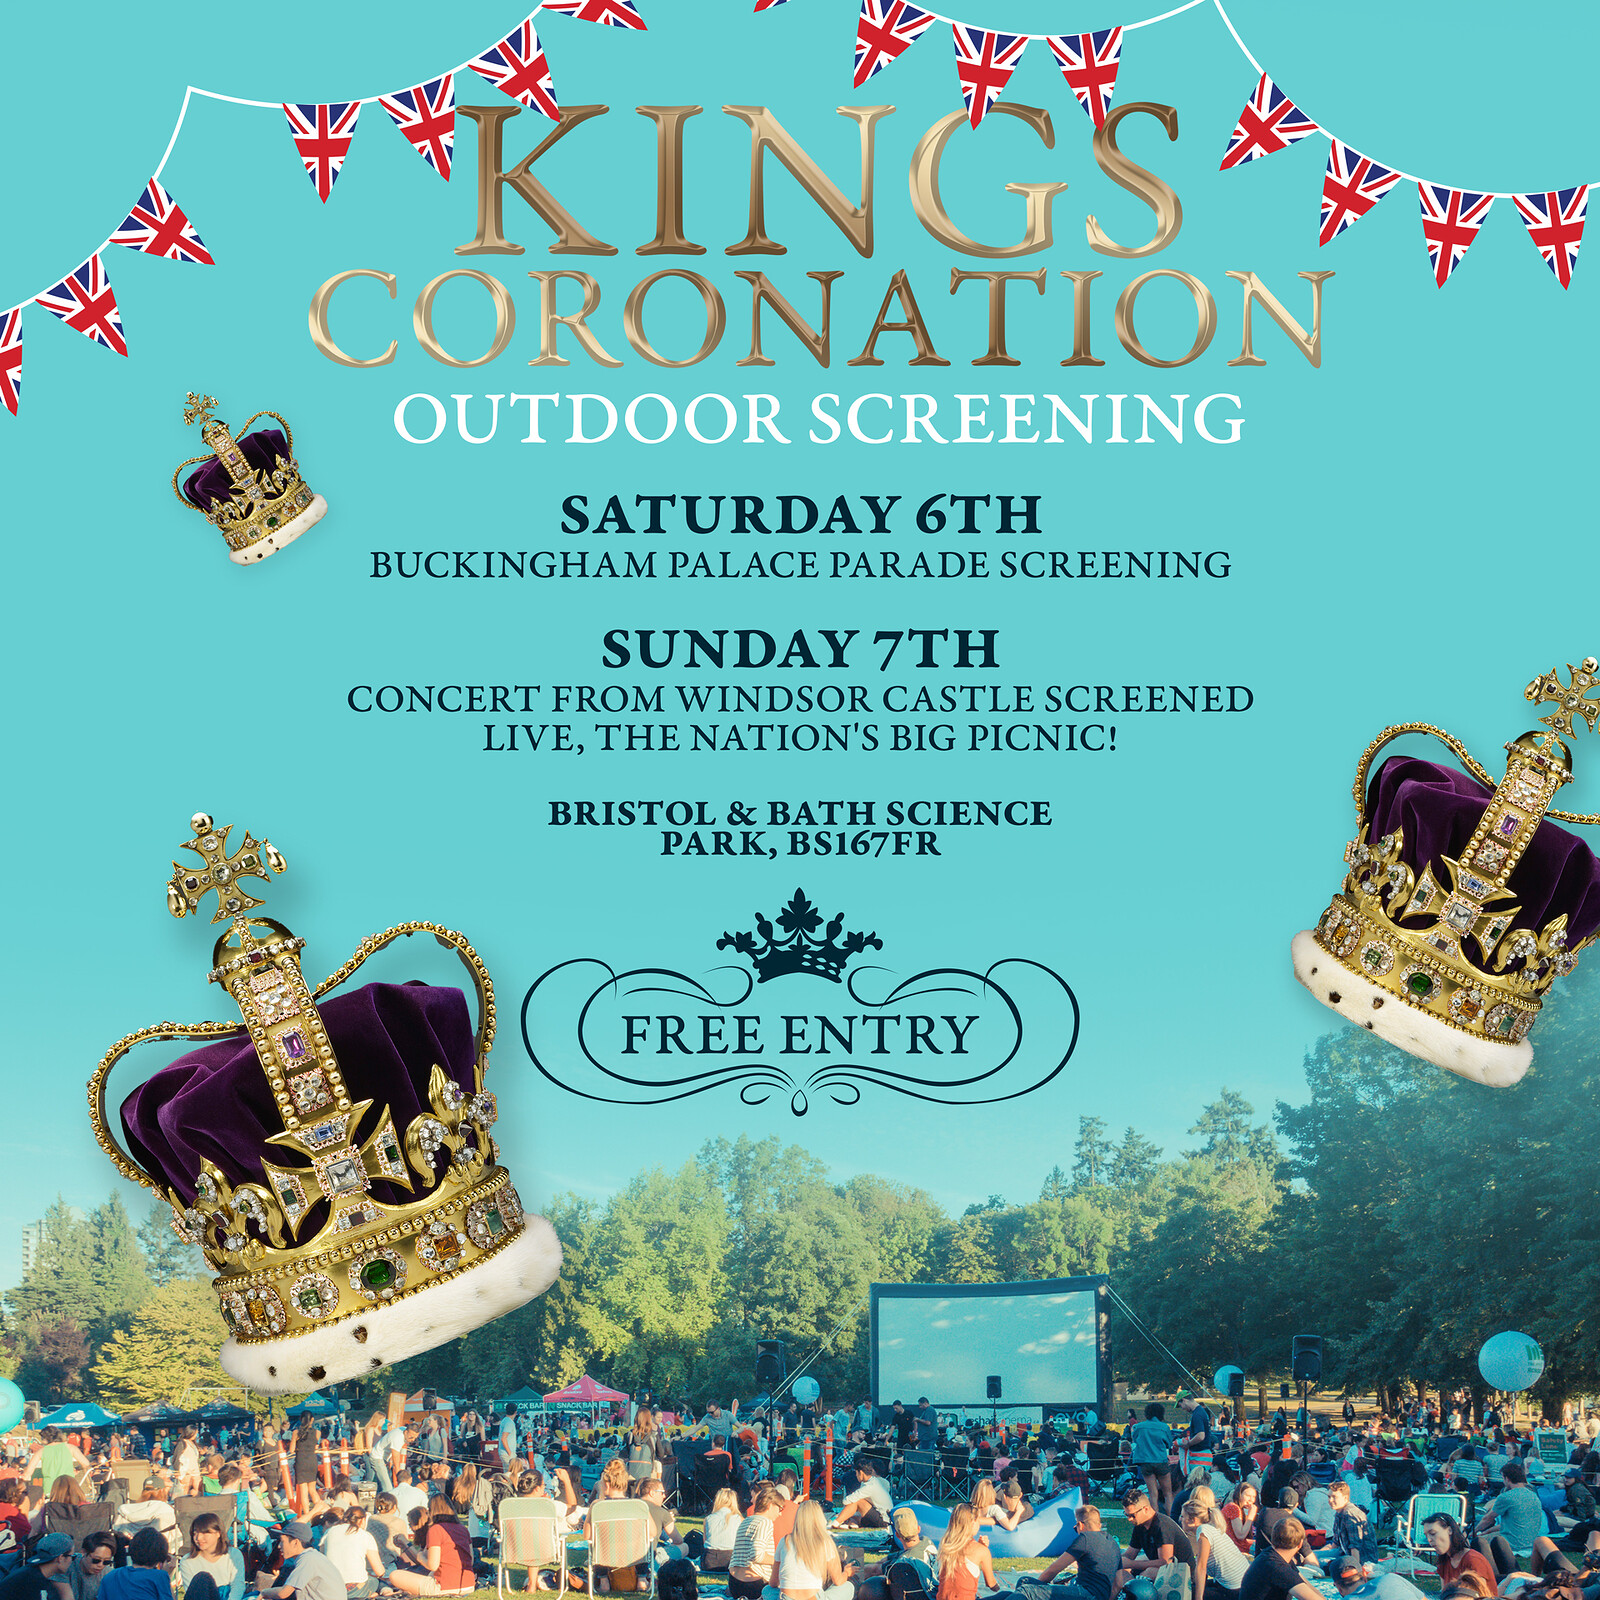 Kings Coronation Concert- On The Big Screen at Bristol & Bath Science Park, BS16 7FR